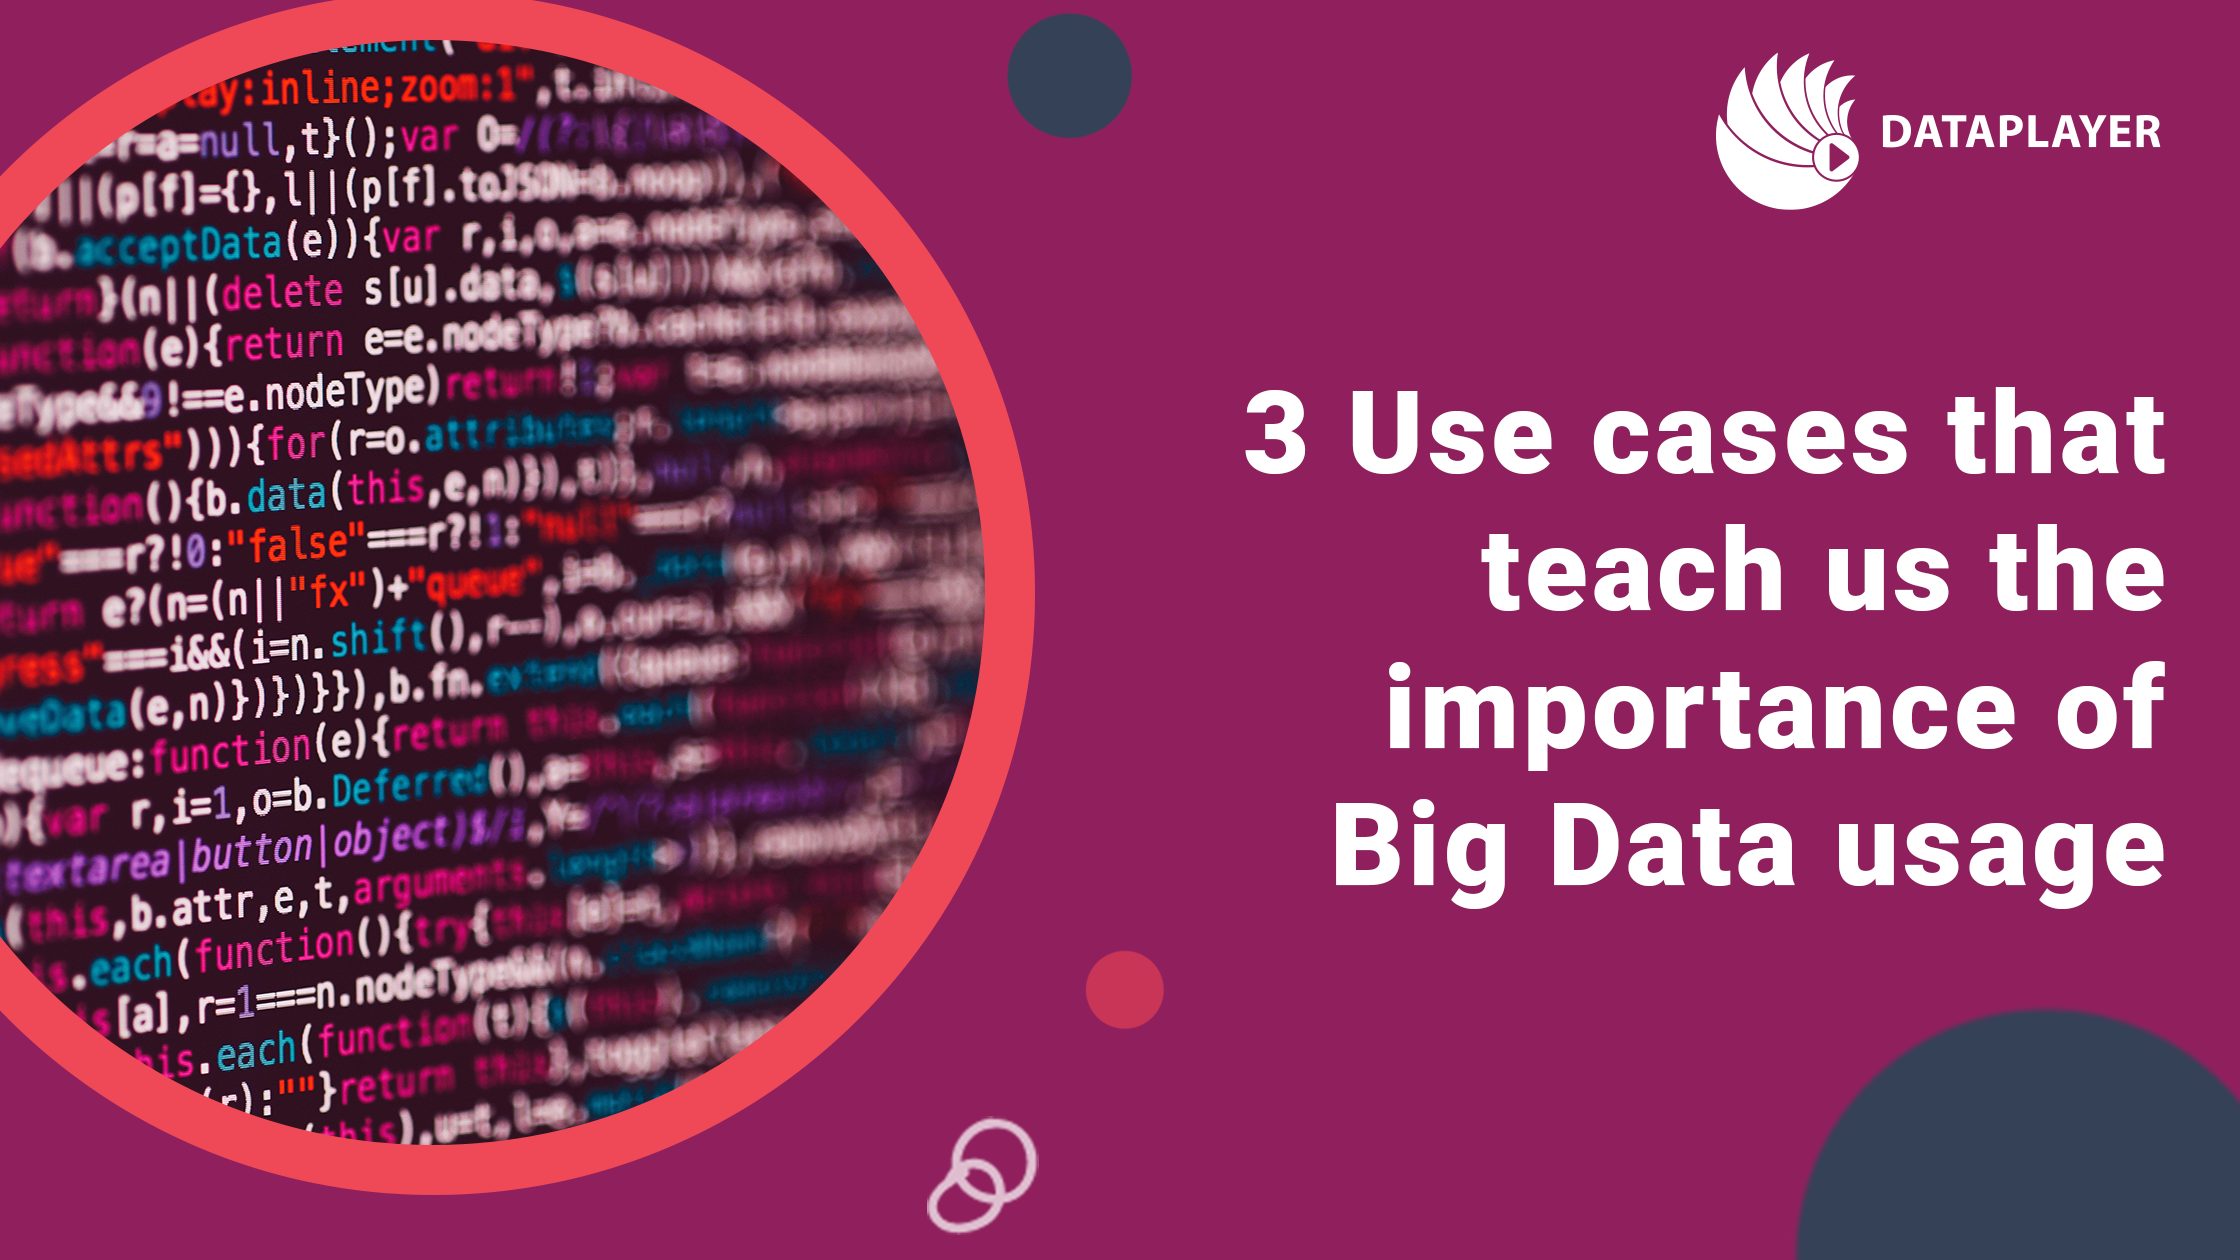 3 Use cases that teach us the importance of Big Data usage